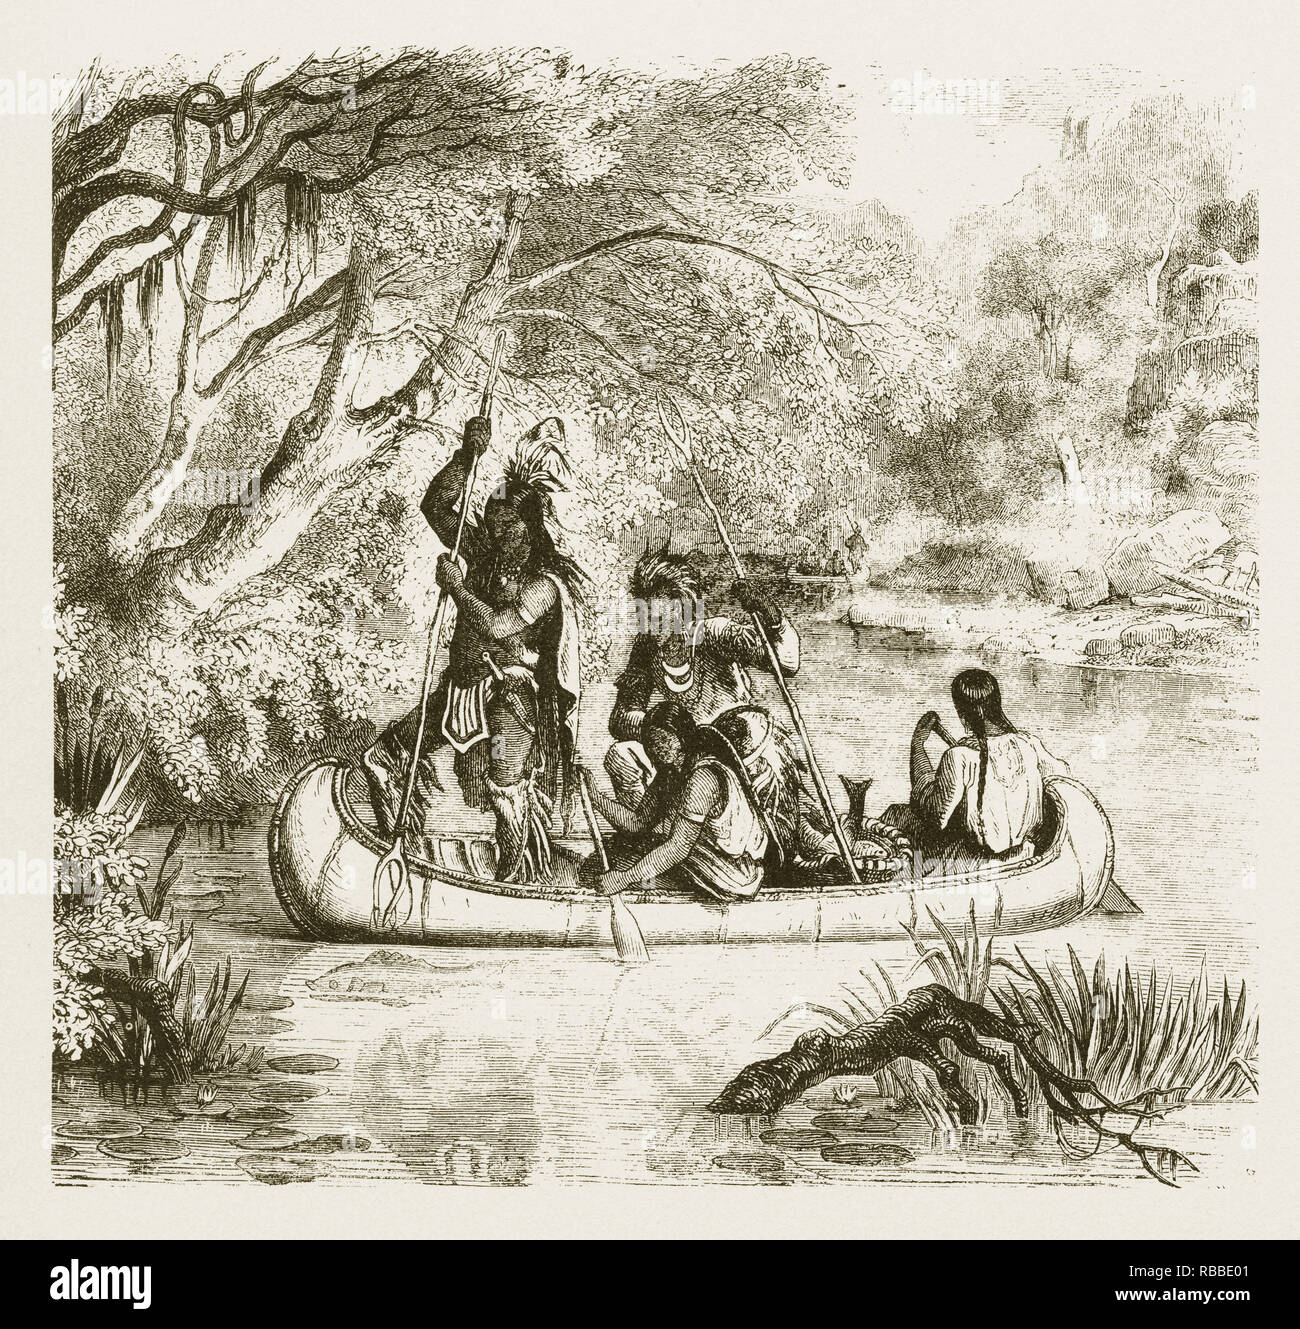 Spear Fishing from a Canoe, American Indians Engraving, 1859 Stock